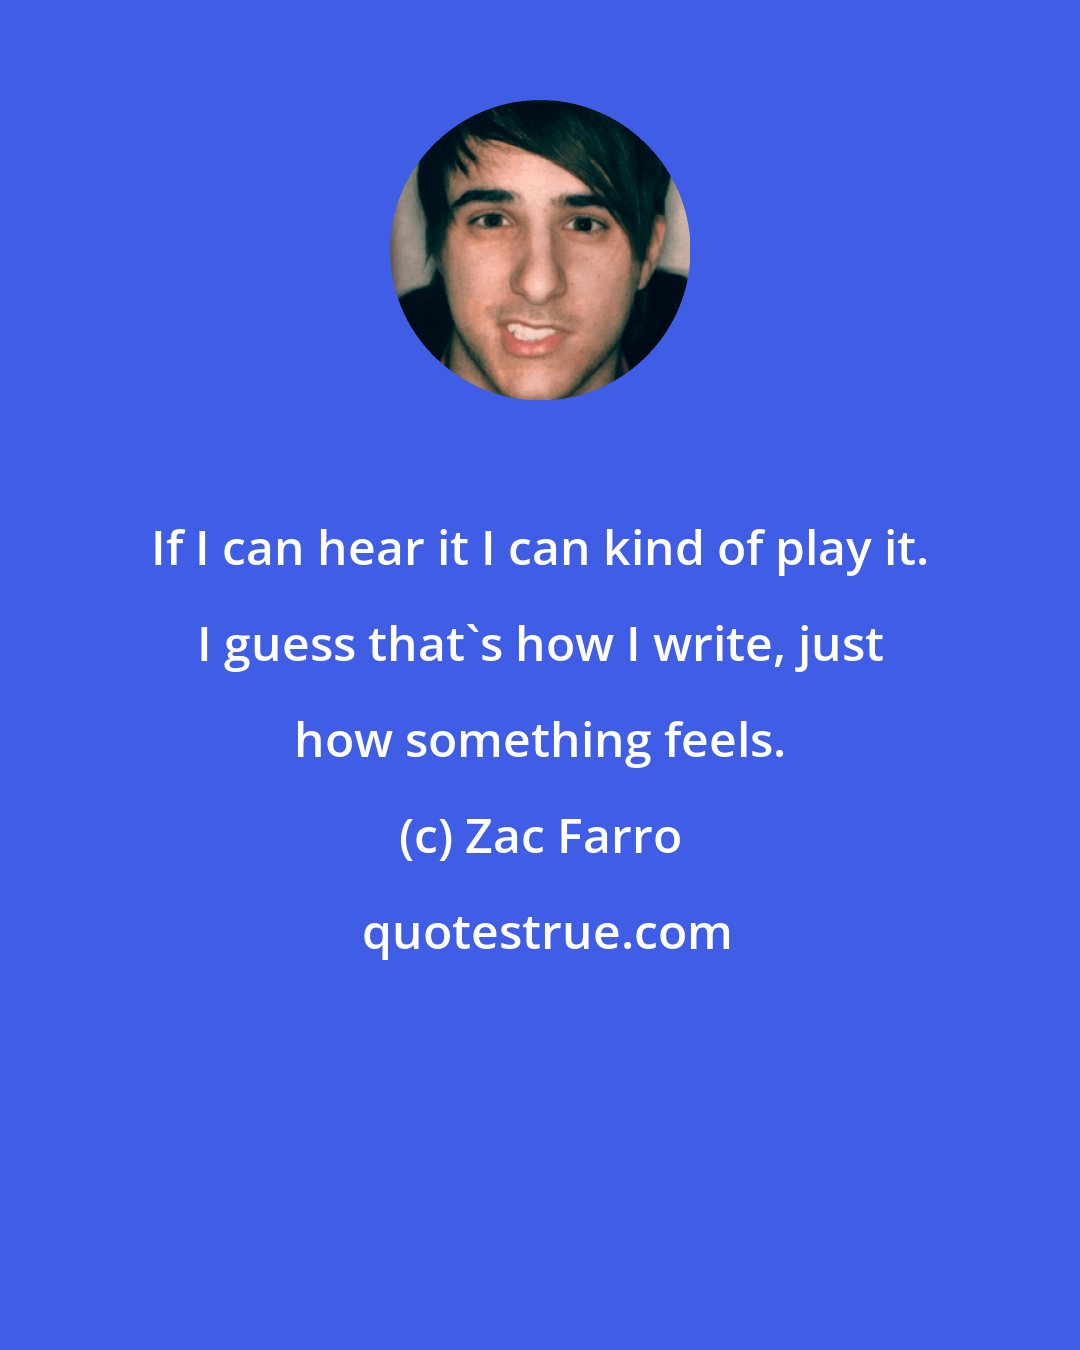 Zac Farro: If I can hear it I can kind of play it. I guess that's how I write, just how something feels.